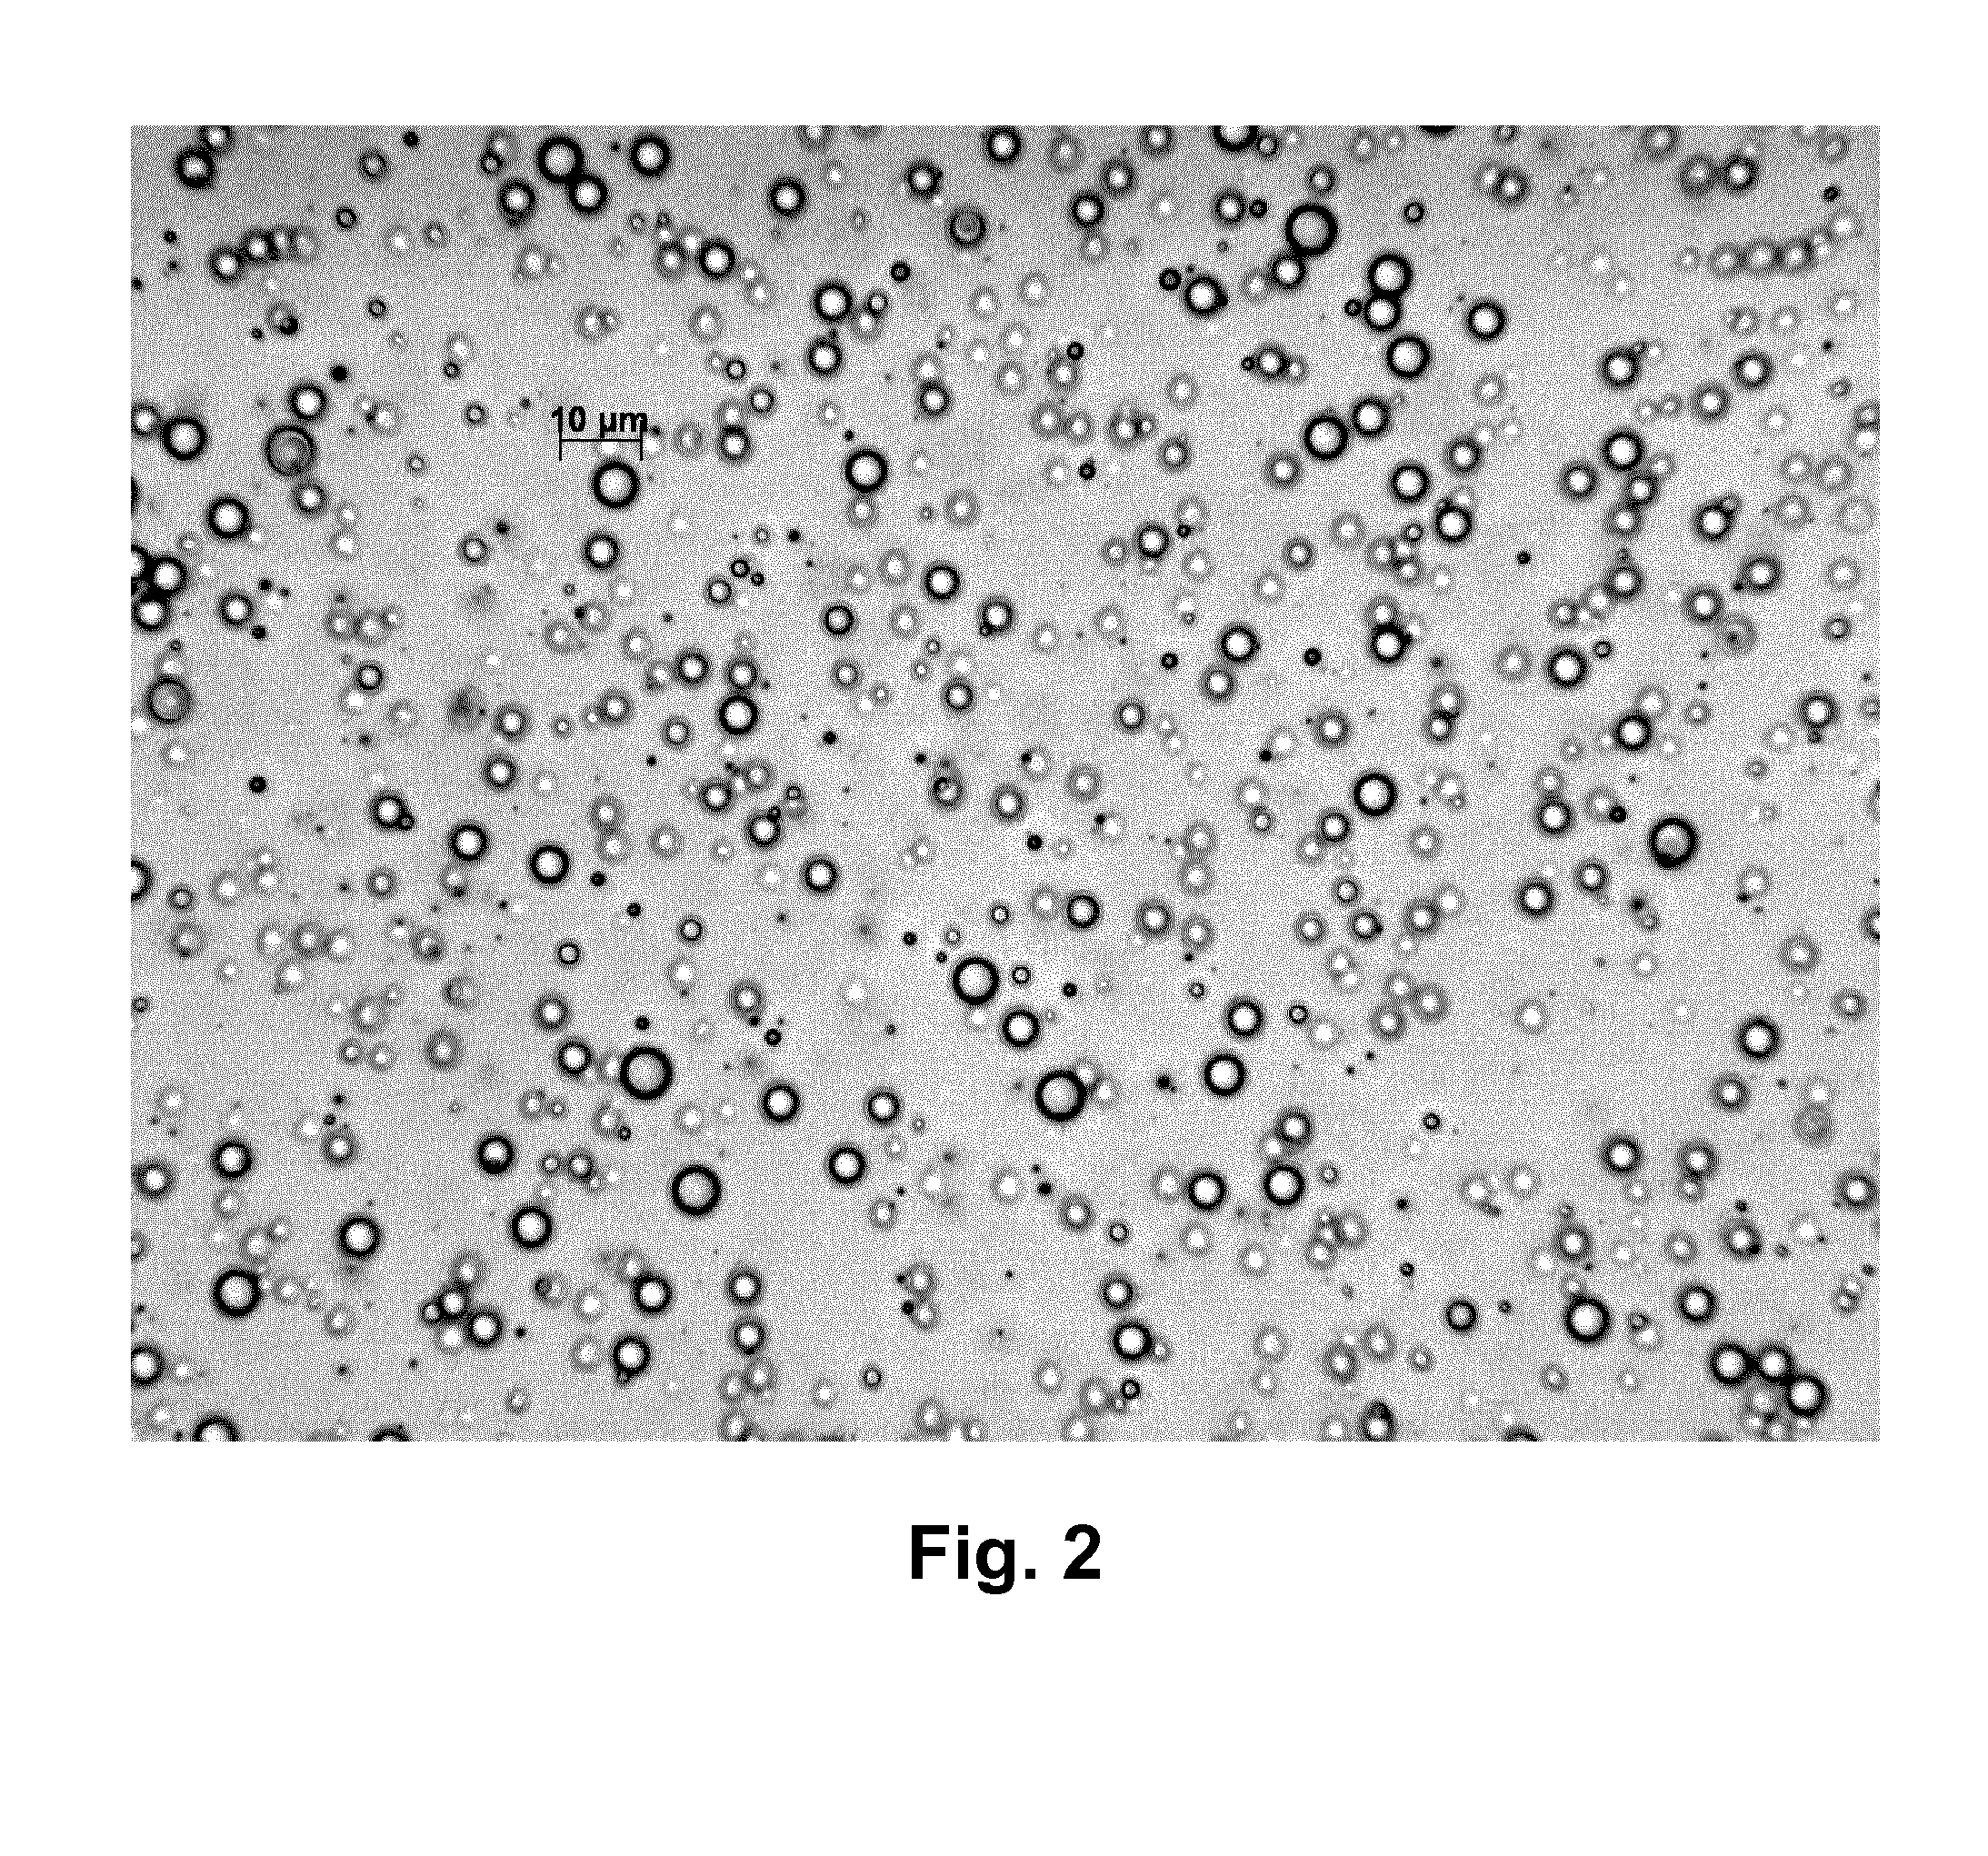 Herbicidal composition comprising polymeric microparticles containing a herbicide